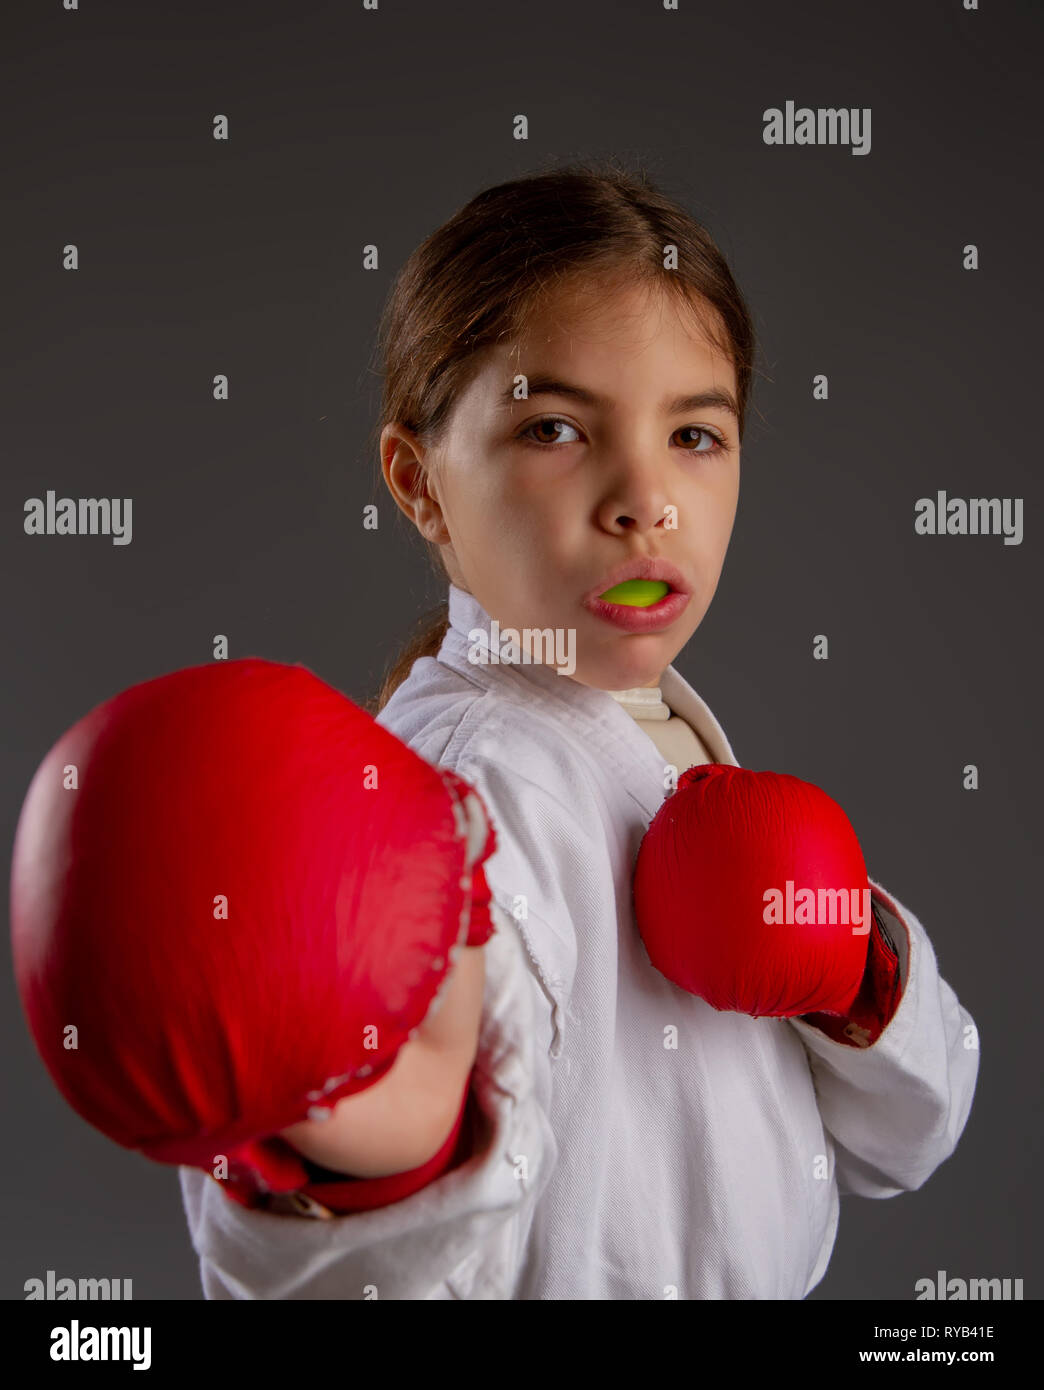 Girl with a protective mouth guard Stock Photo